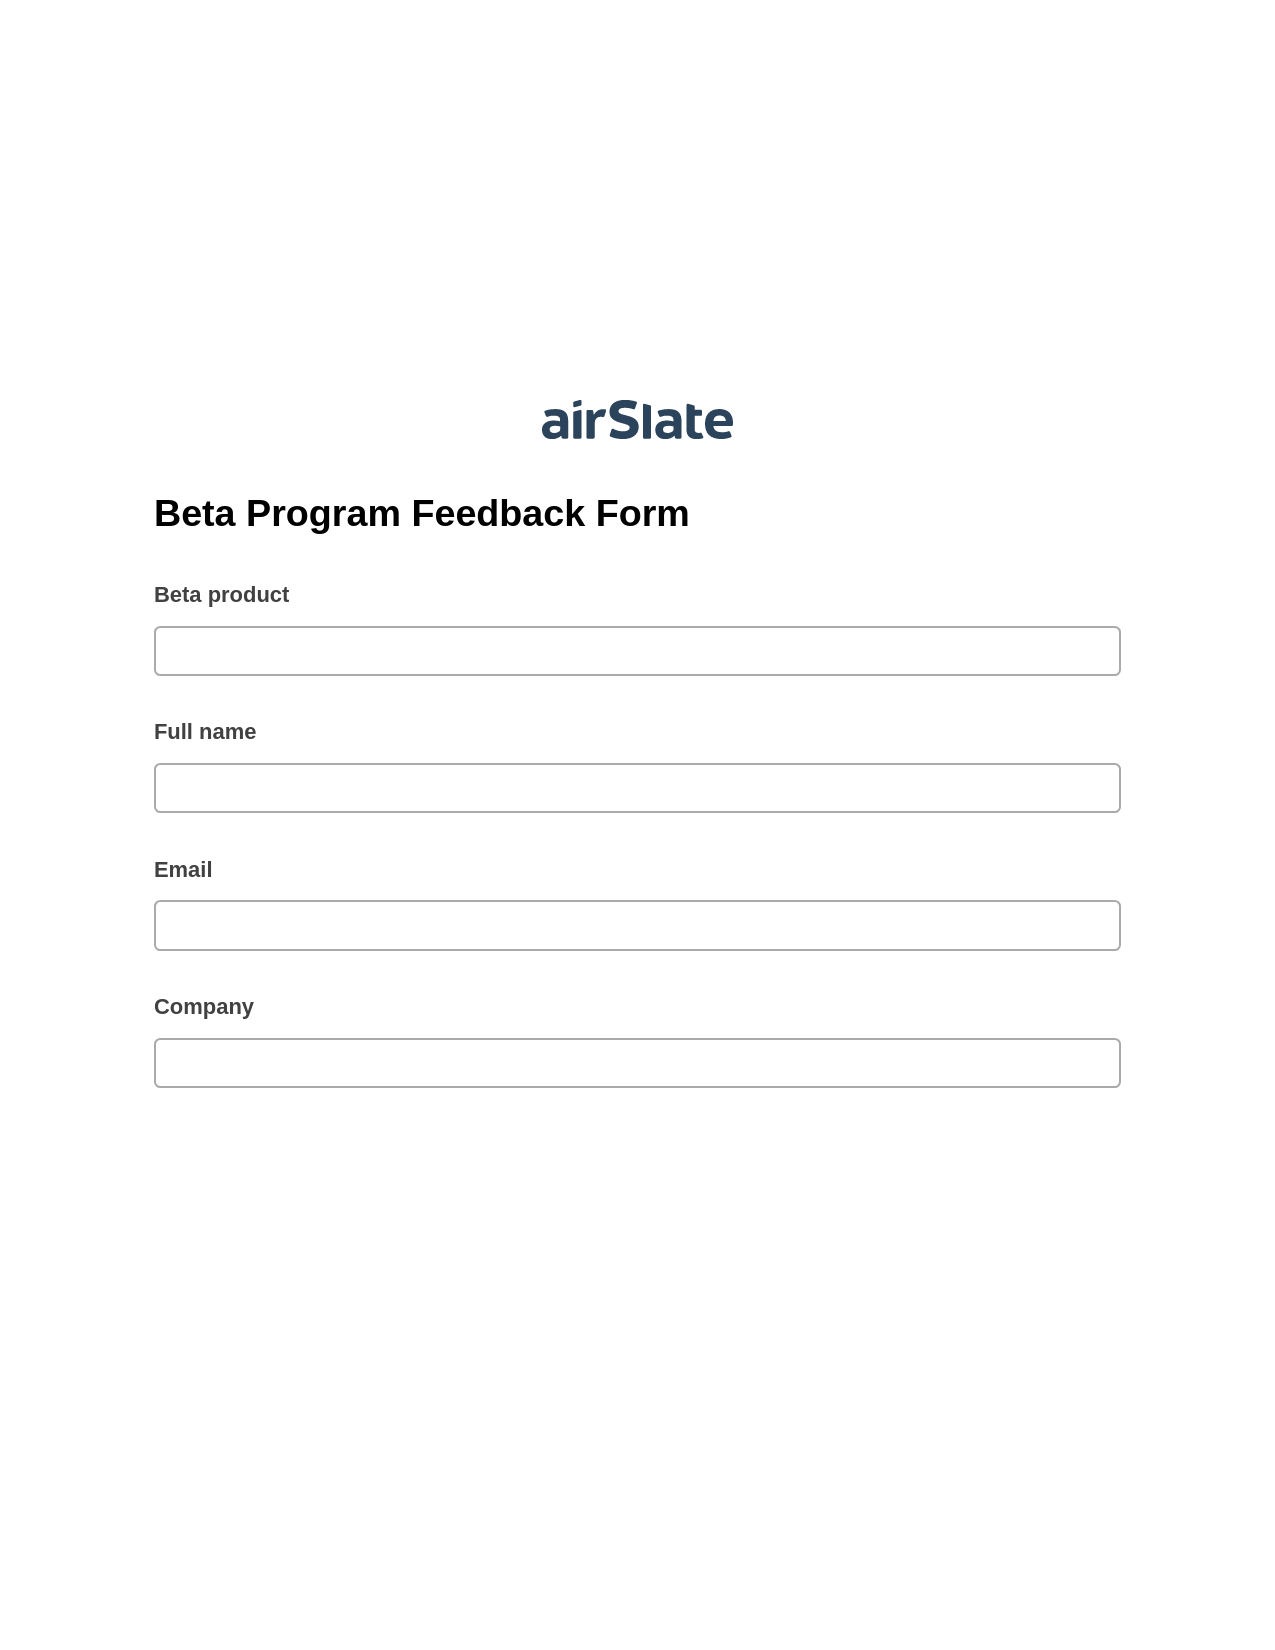 Multirole Beta Program Feedback Form Pre-fill Slate from MS Dynamics 365 Records Bot, Email Notification Bot, Export to Formstack Documents Bot